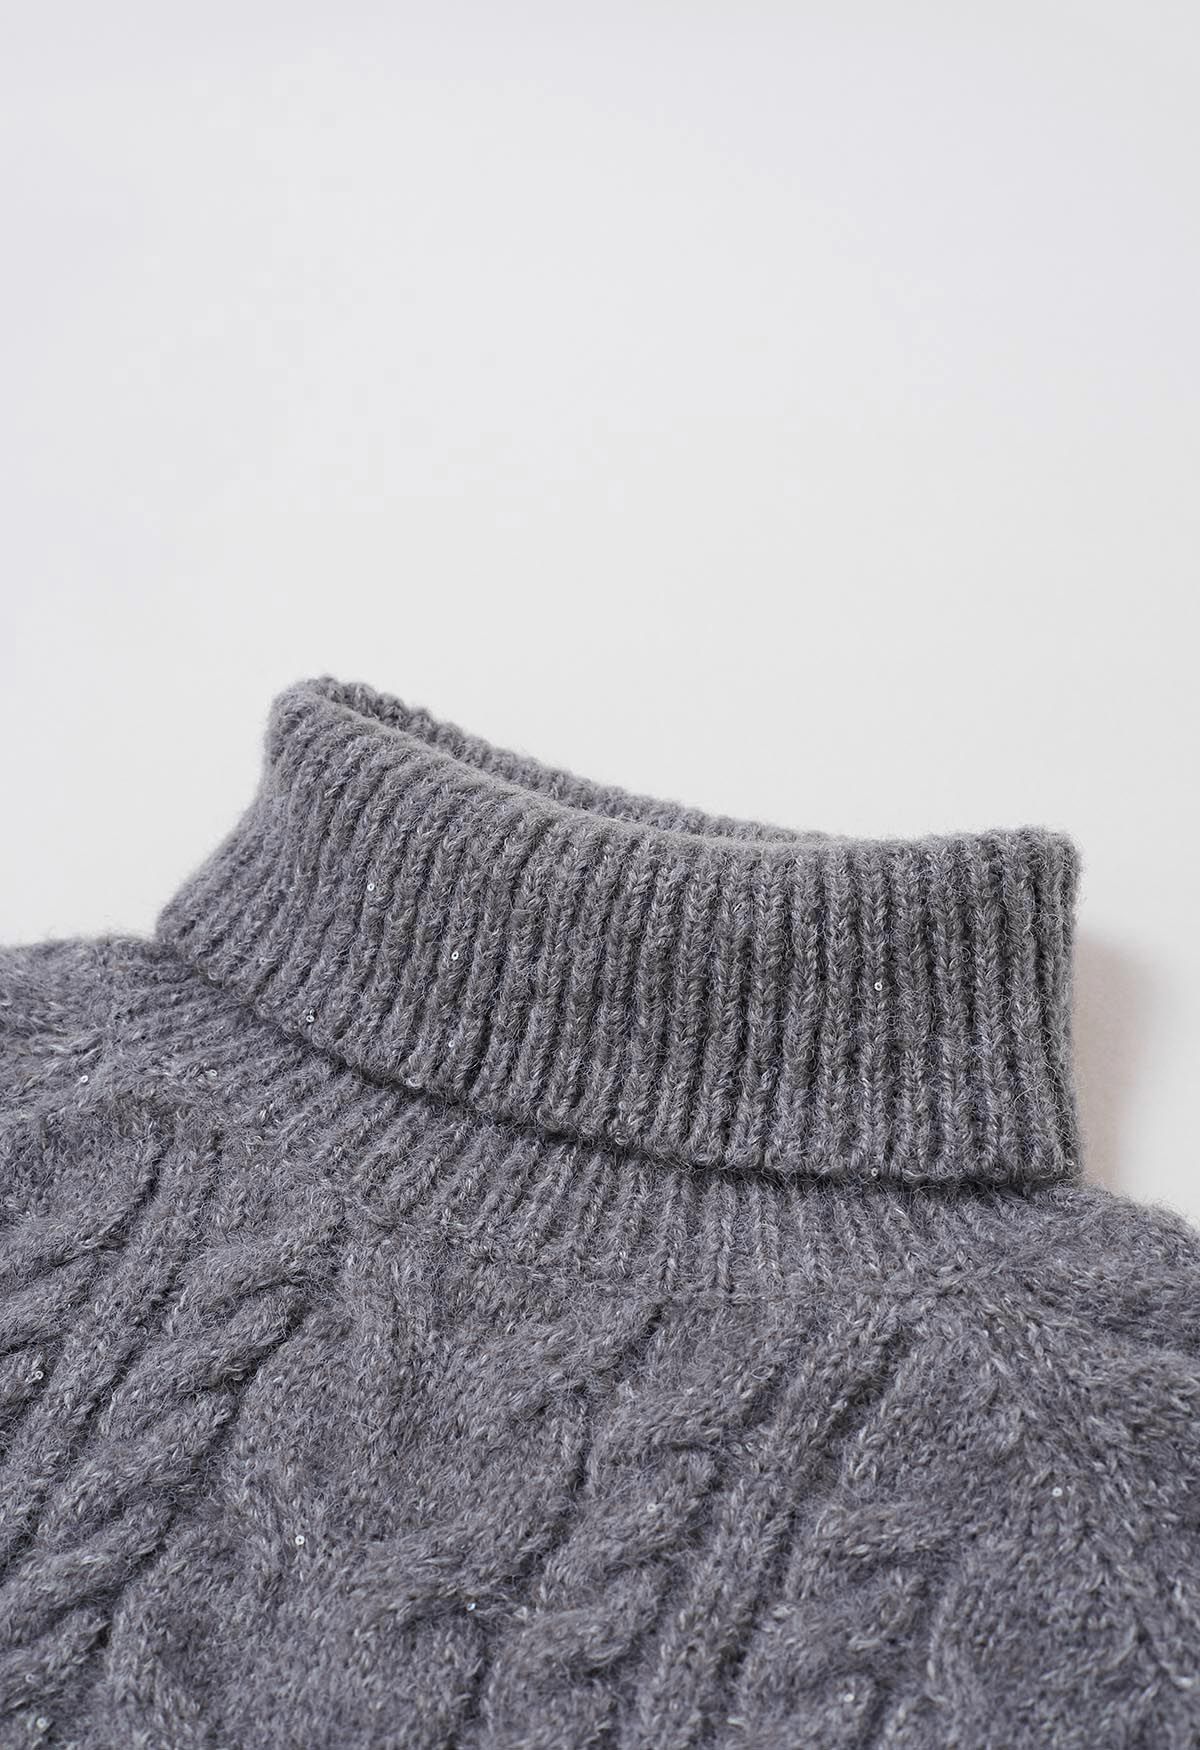 Turtleneck Sequin Cable Knit Sweater in Grey